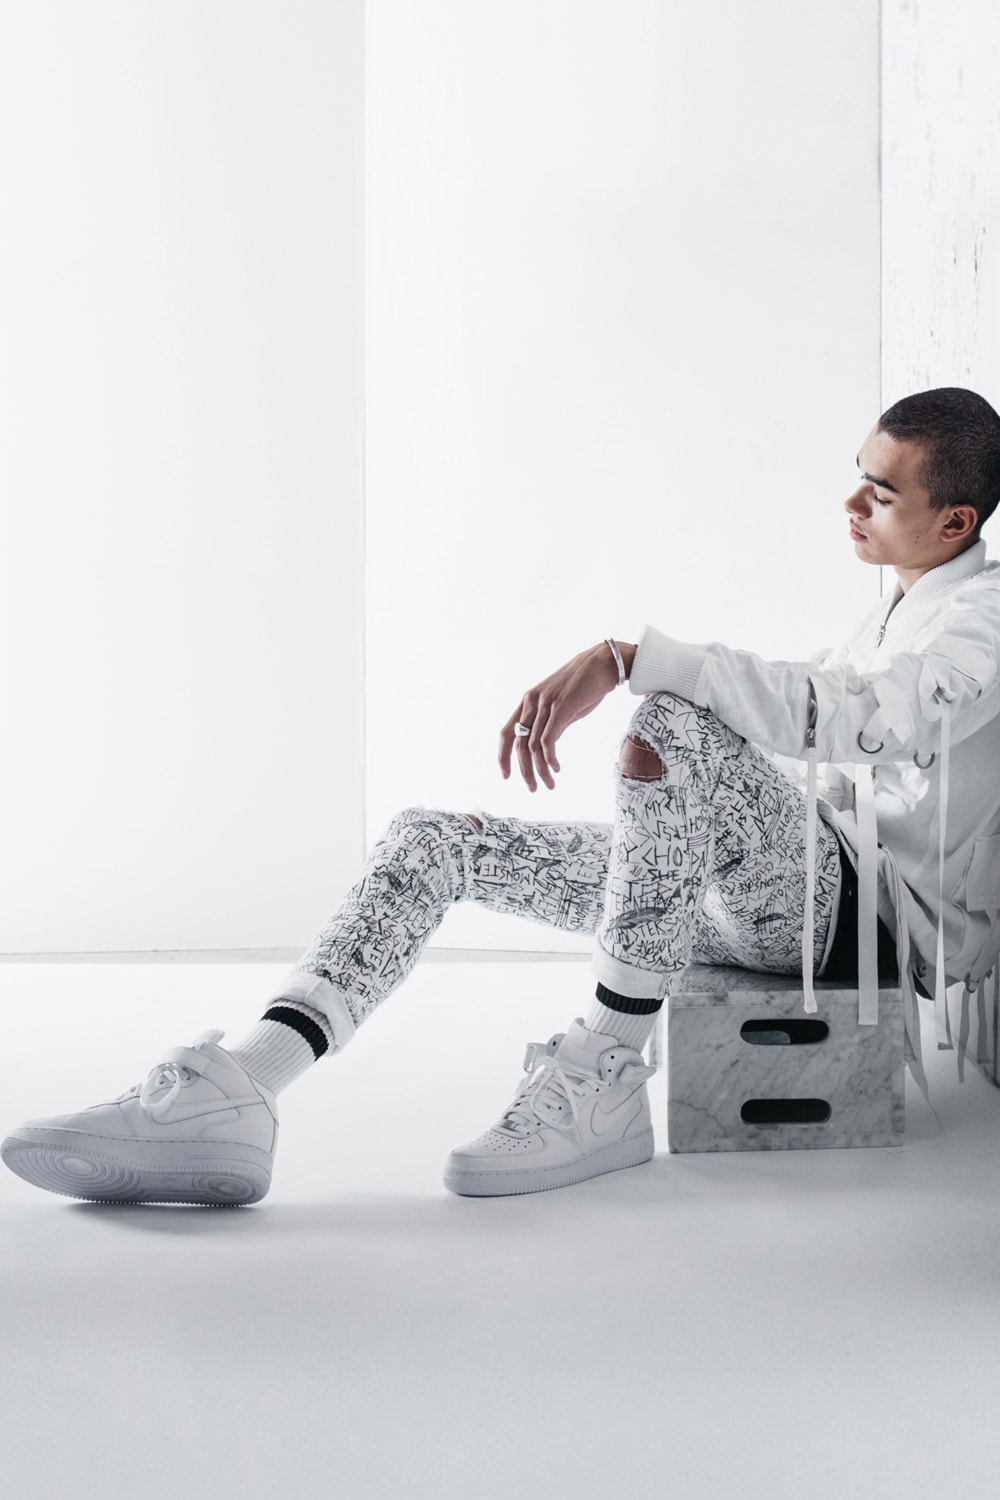 STAMPD Chris Stamp The Mummy Capsule Collection Collaboration Transparent Translucent Trench